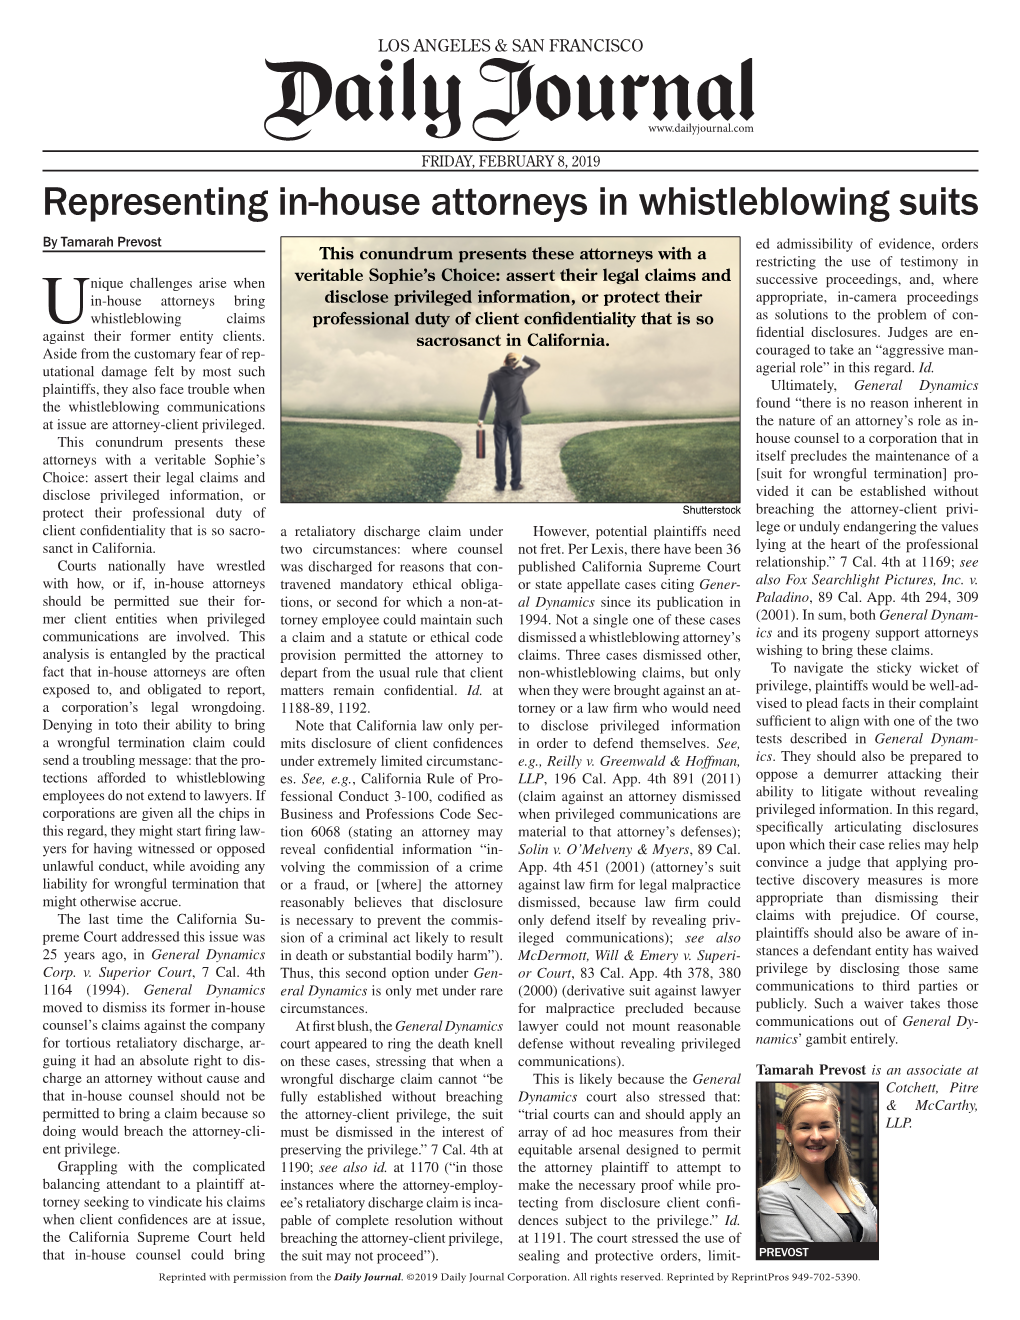 Representing In-House Attorneys in Whistleblowing Suits